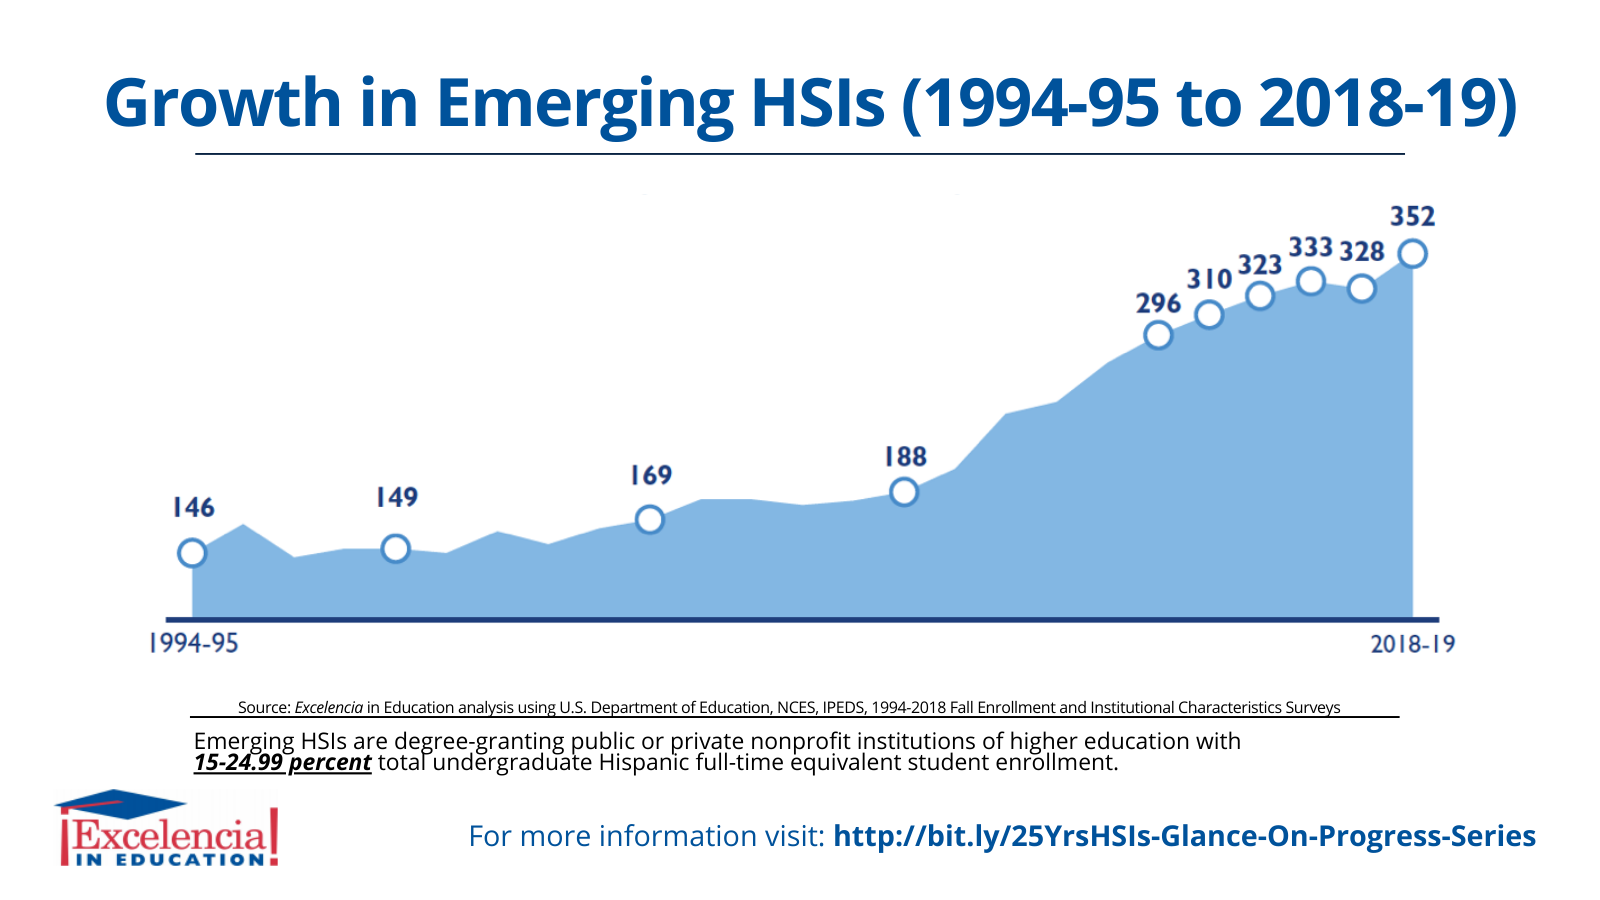 Infographic-Growth in Emerging HSIs 1994-95 to 2018-19